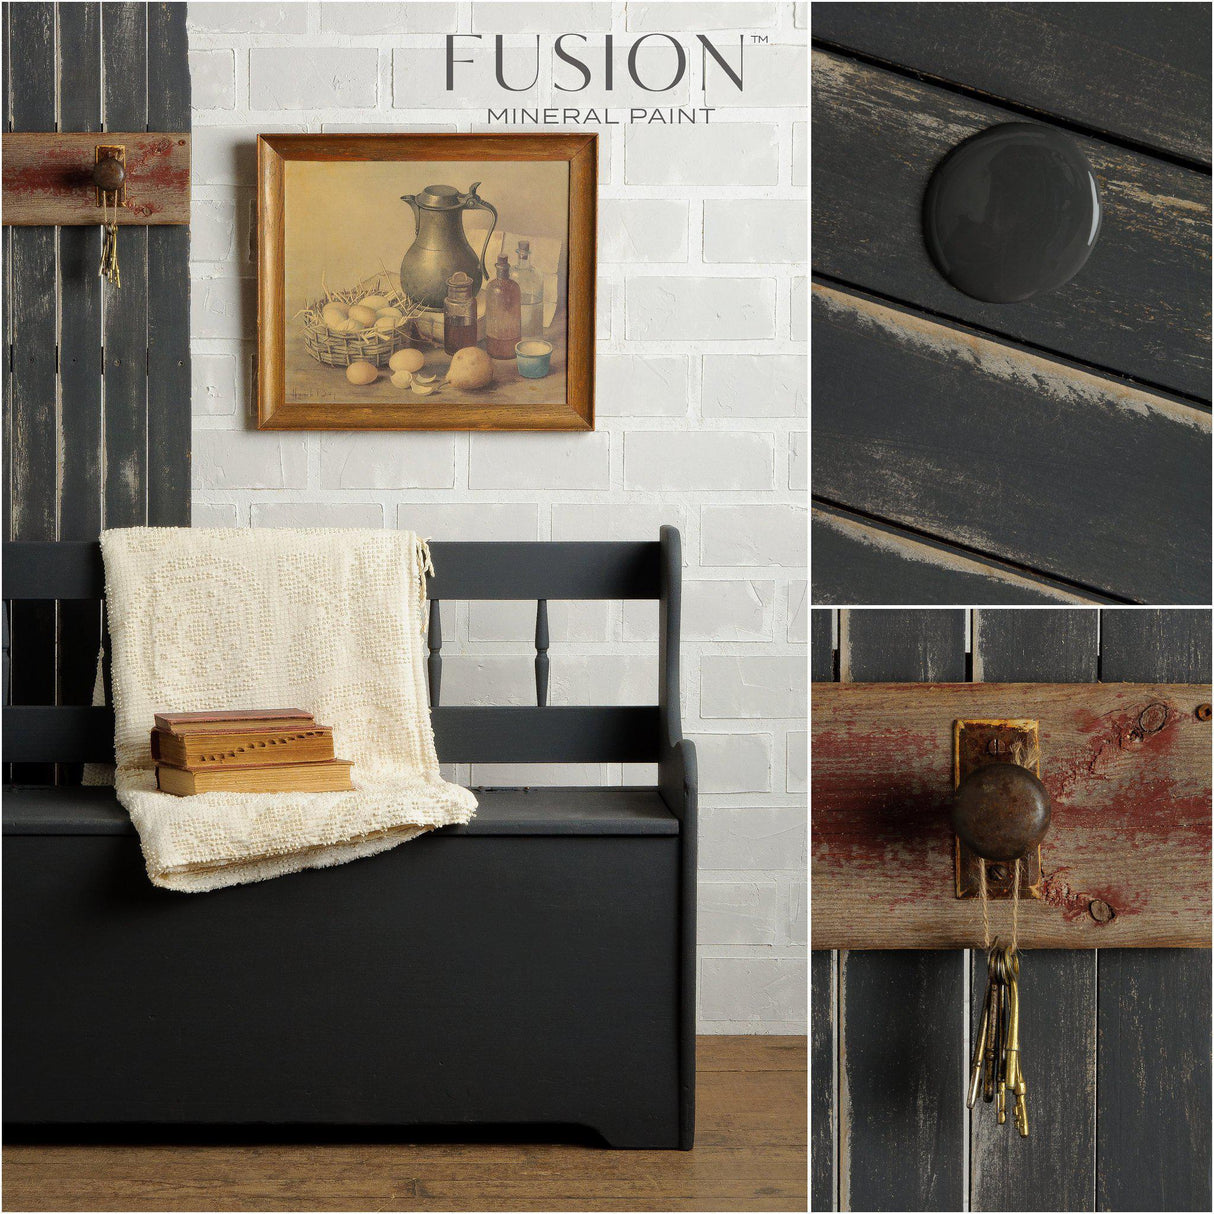 Ash Fusion Mineral Paint @ Painted Heirloom